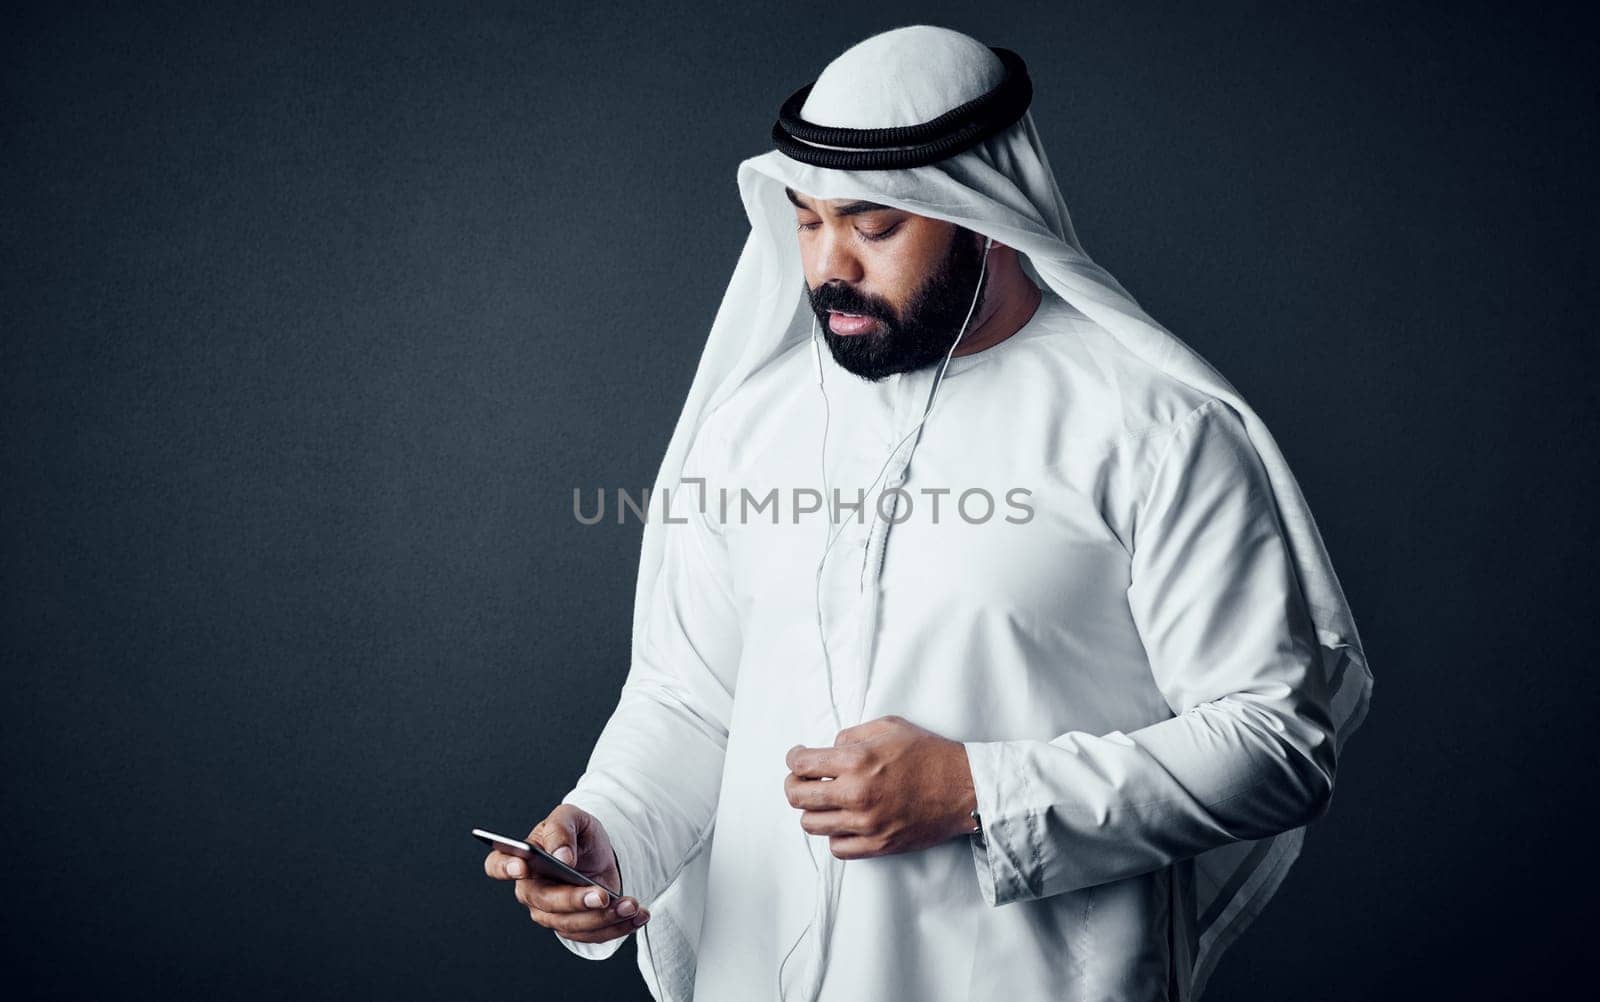 Upgrading his traditional ways. Studio shot of a young man dressed in Islamic traditional clothing posing against a dark background